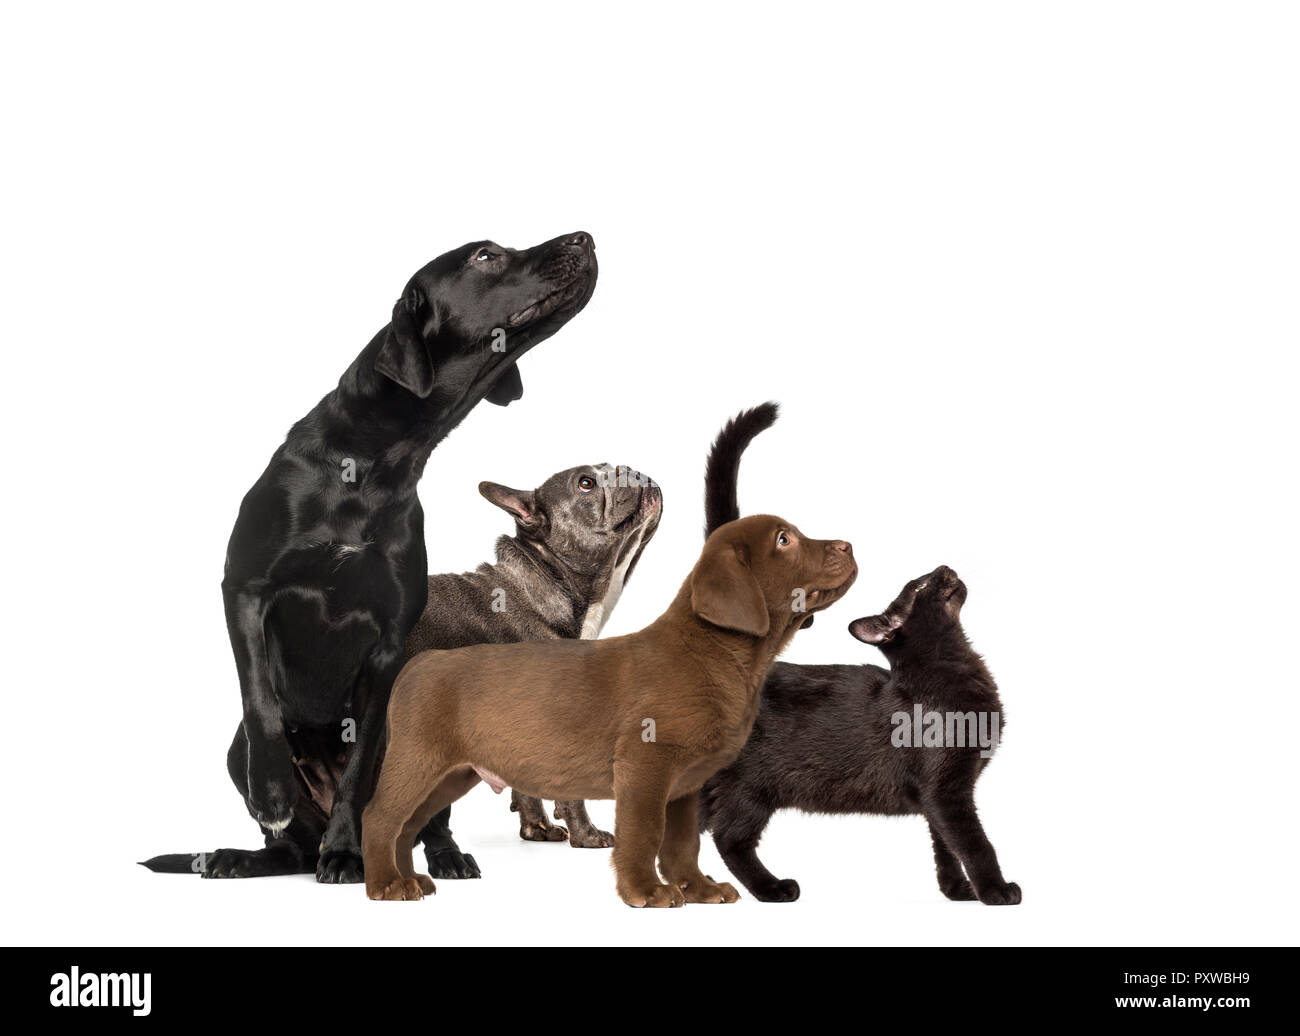 Groups of dogs, Labrador Retriever Puppy, Labrador Retriever, Mixed-breed black cat, French bulldog, in front of white background Stock Photo